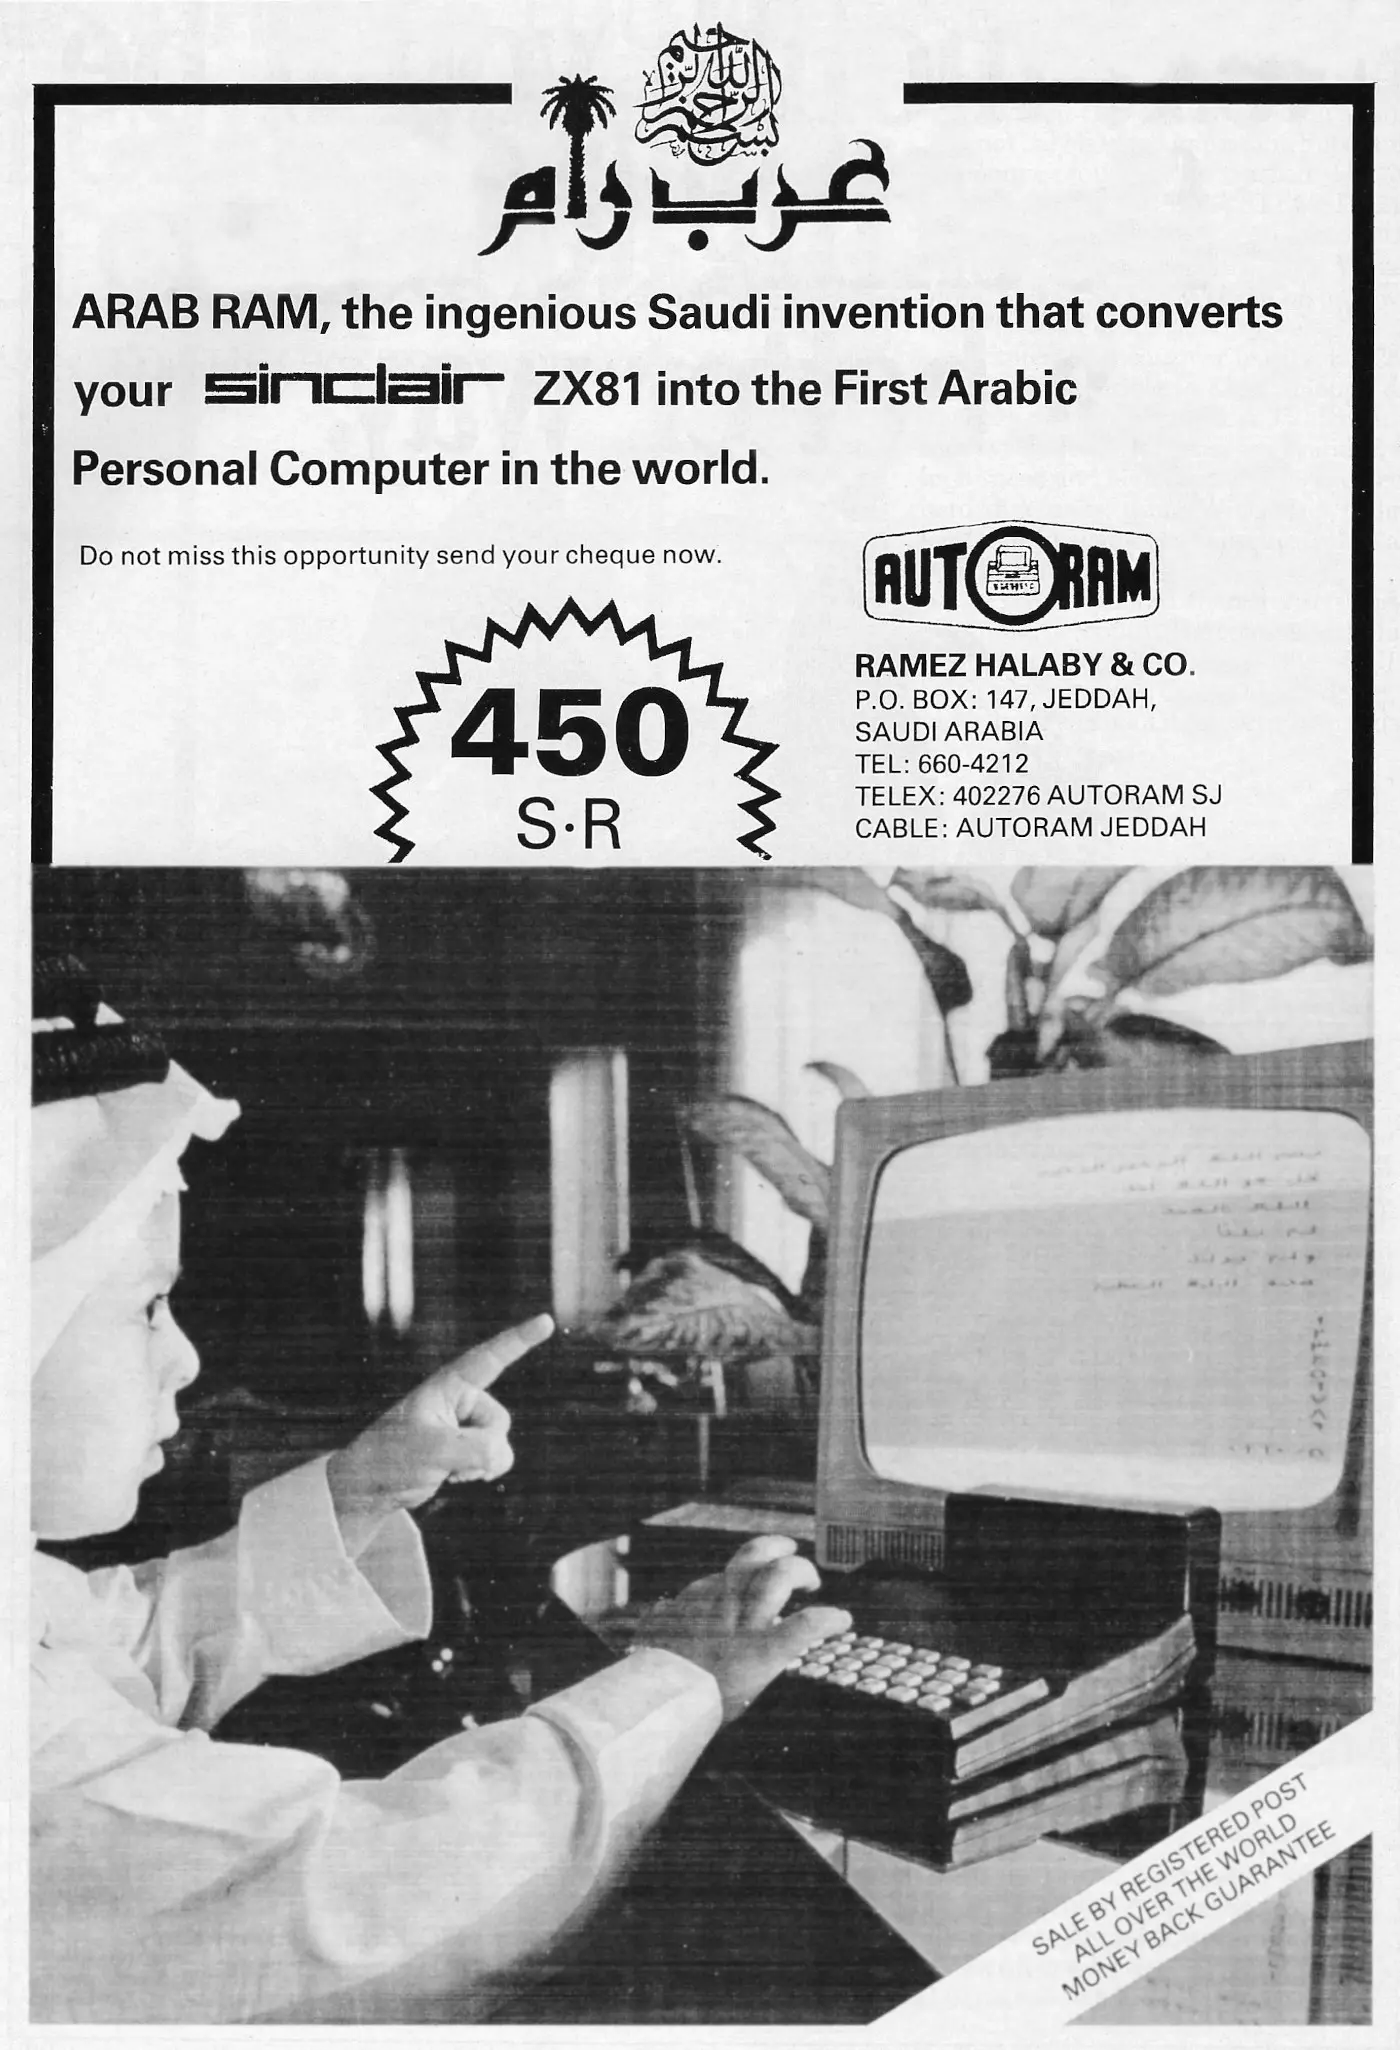 Sinclair Advert: The first Arabic personal computer in the world, from Personal Computer World, March 1984